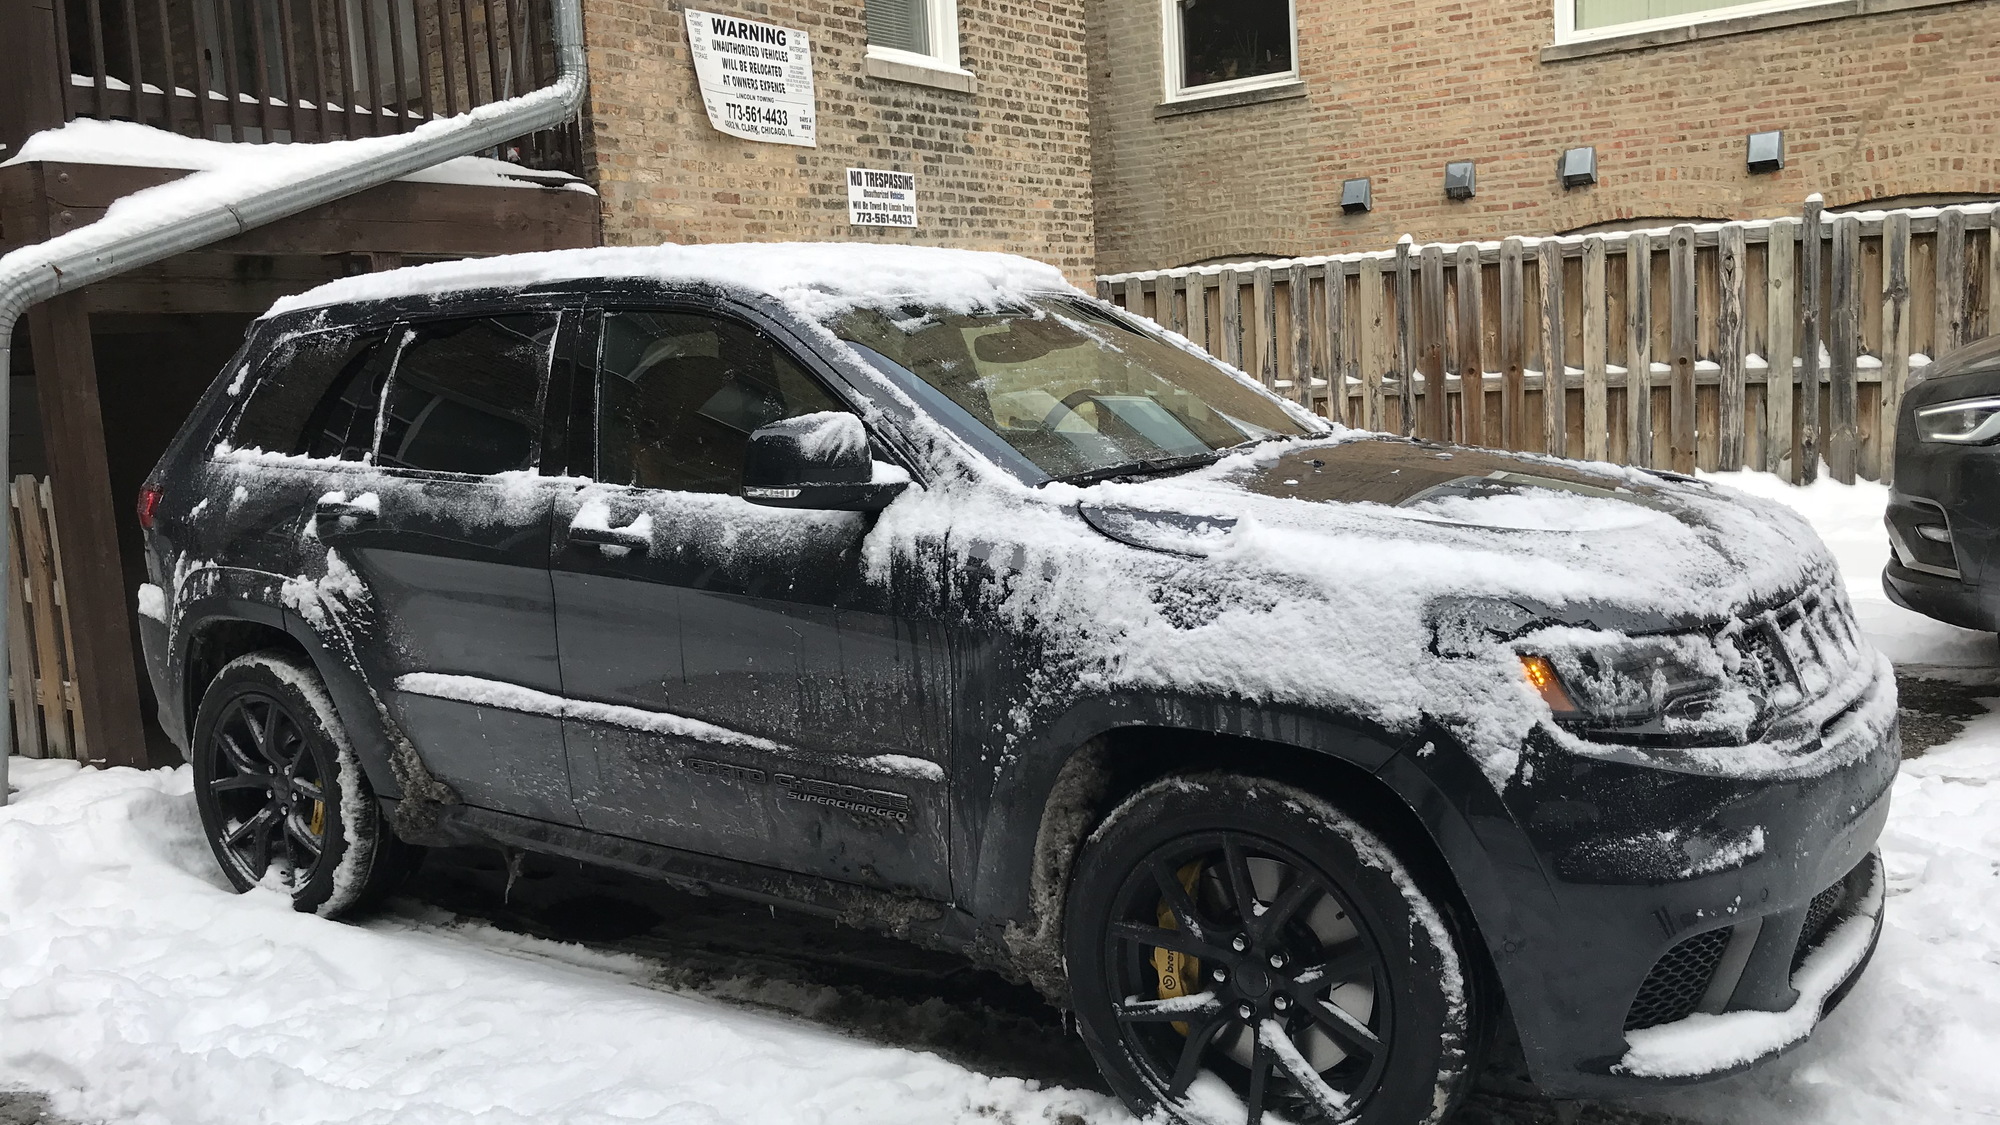 Best Tires For Jeep Grand Cherokee